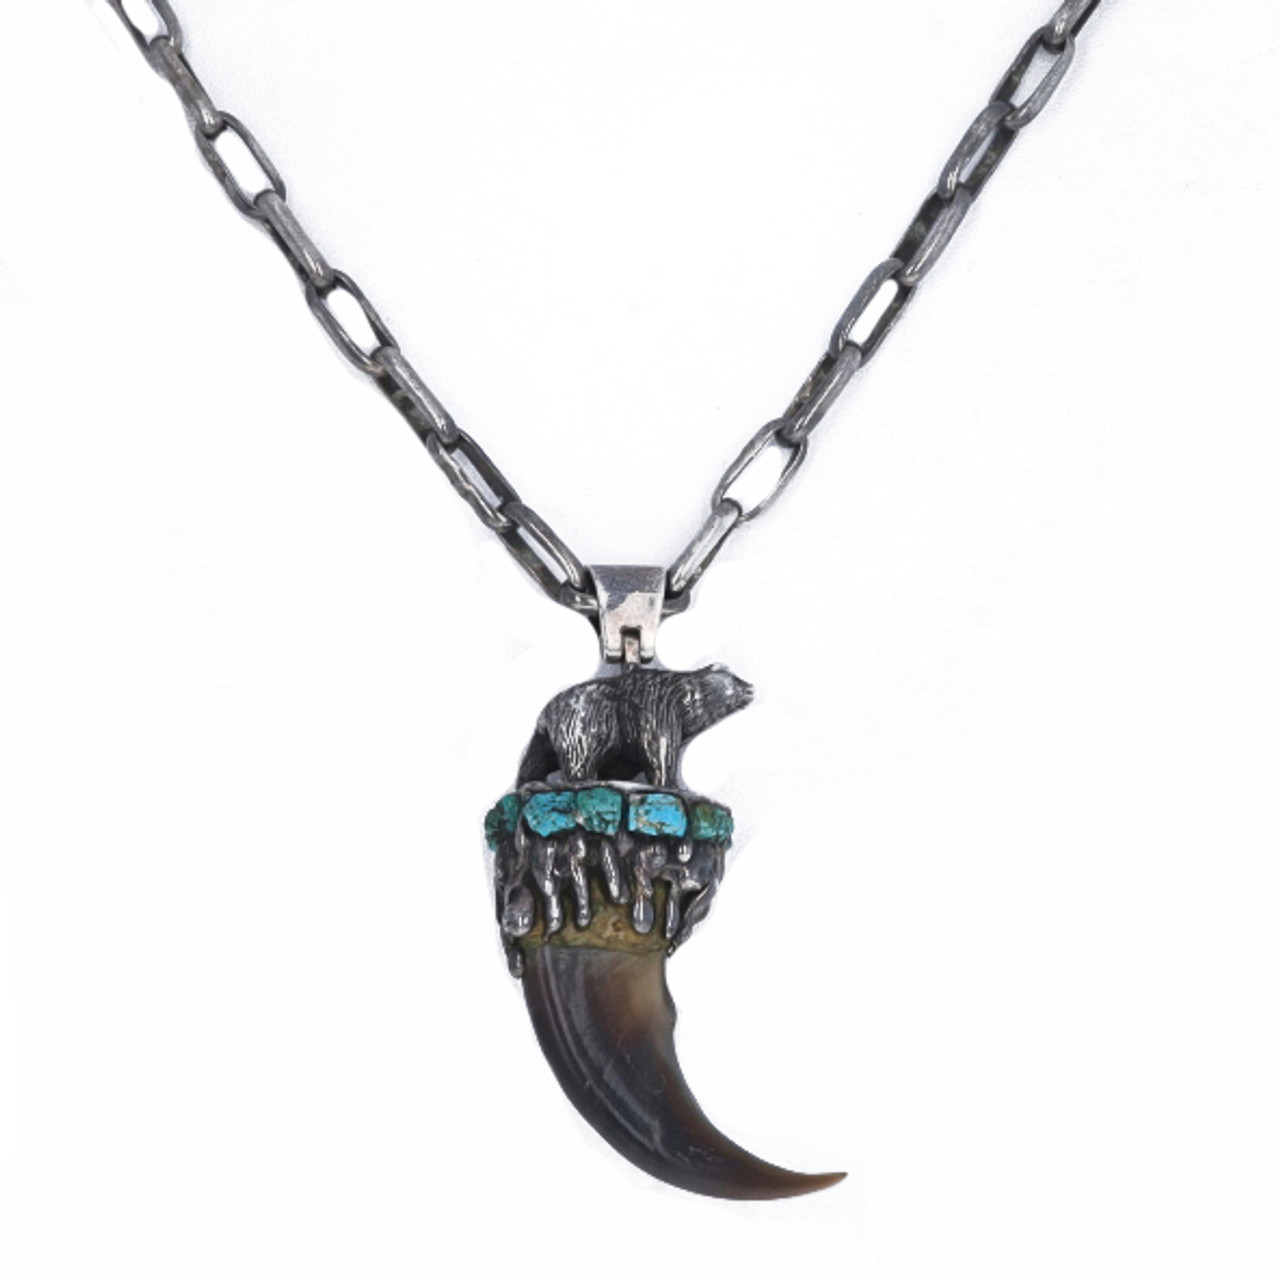 Bear Claw Pendant - Necklaces & Pins - Jewlery